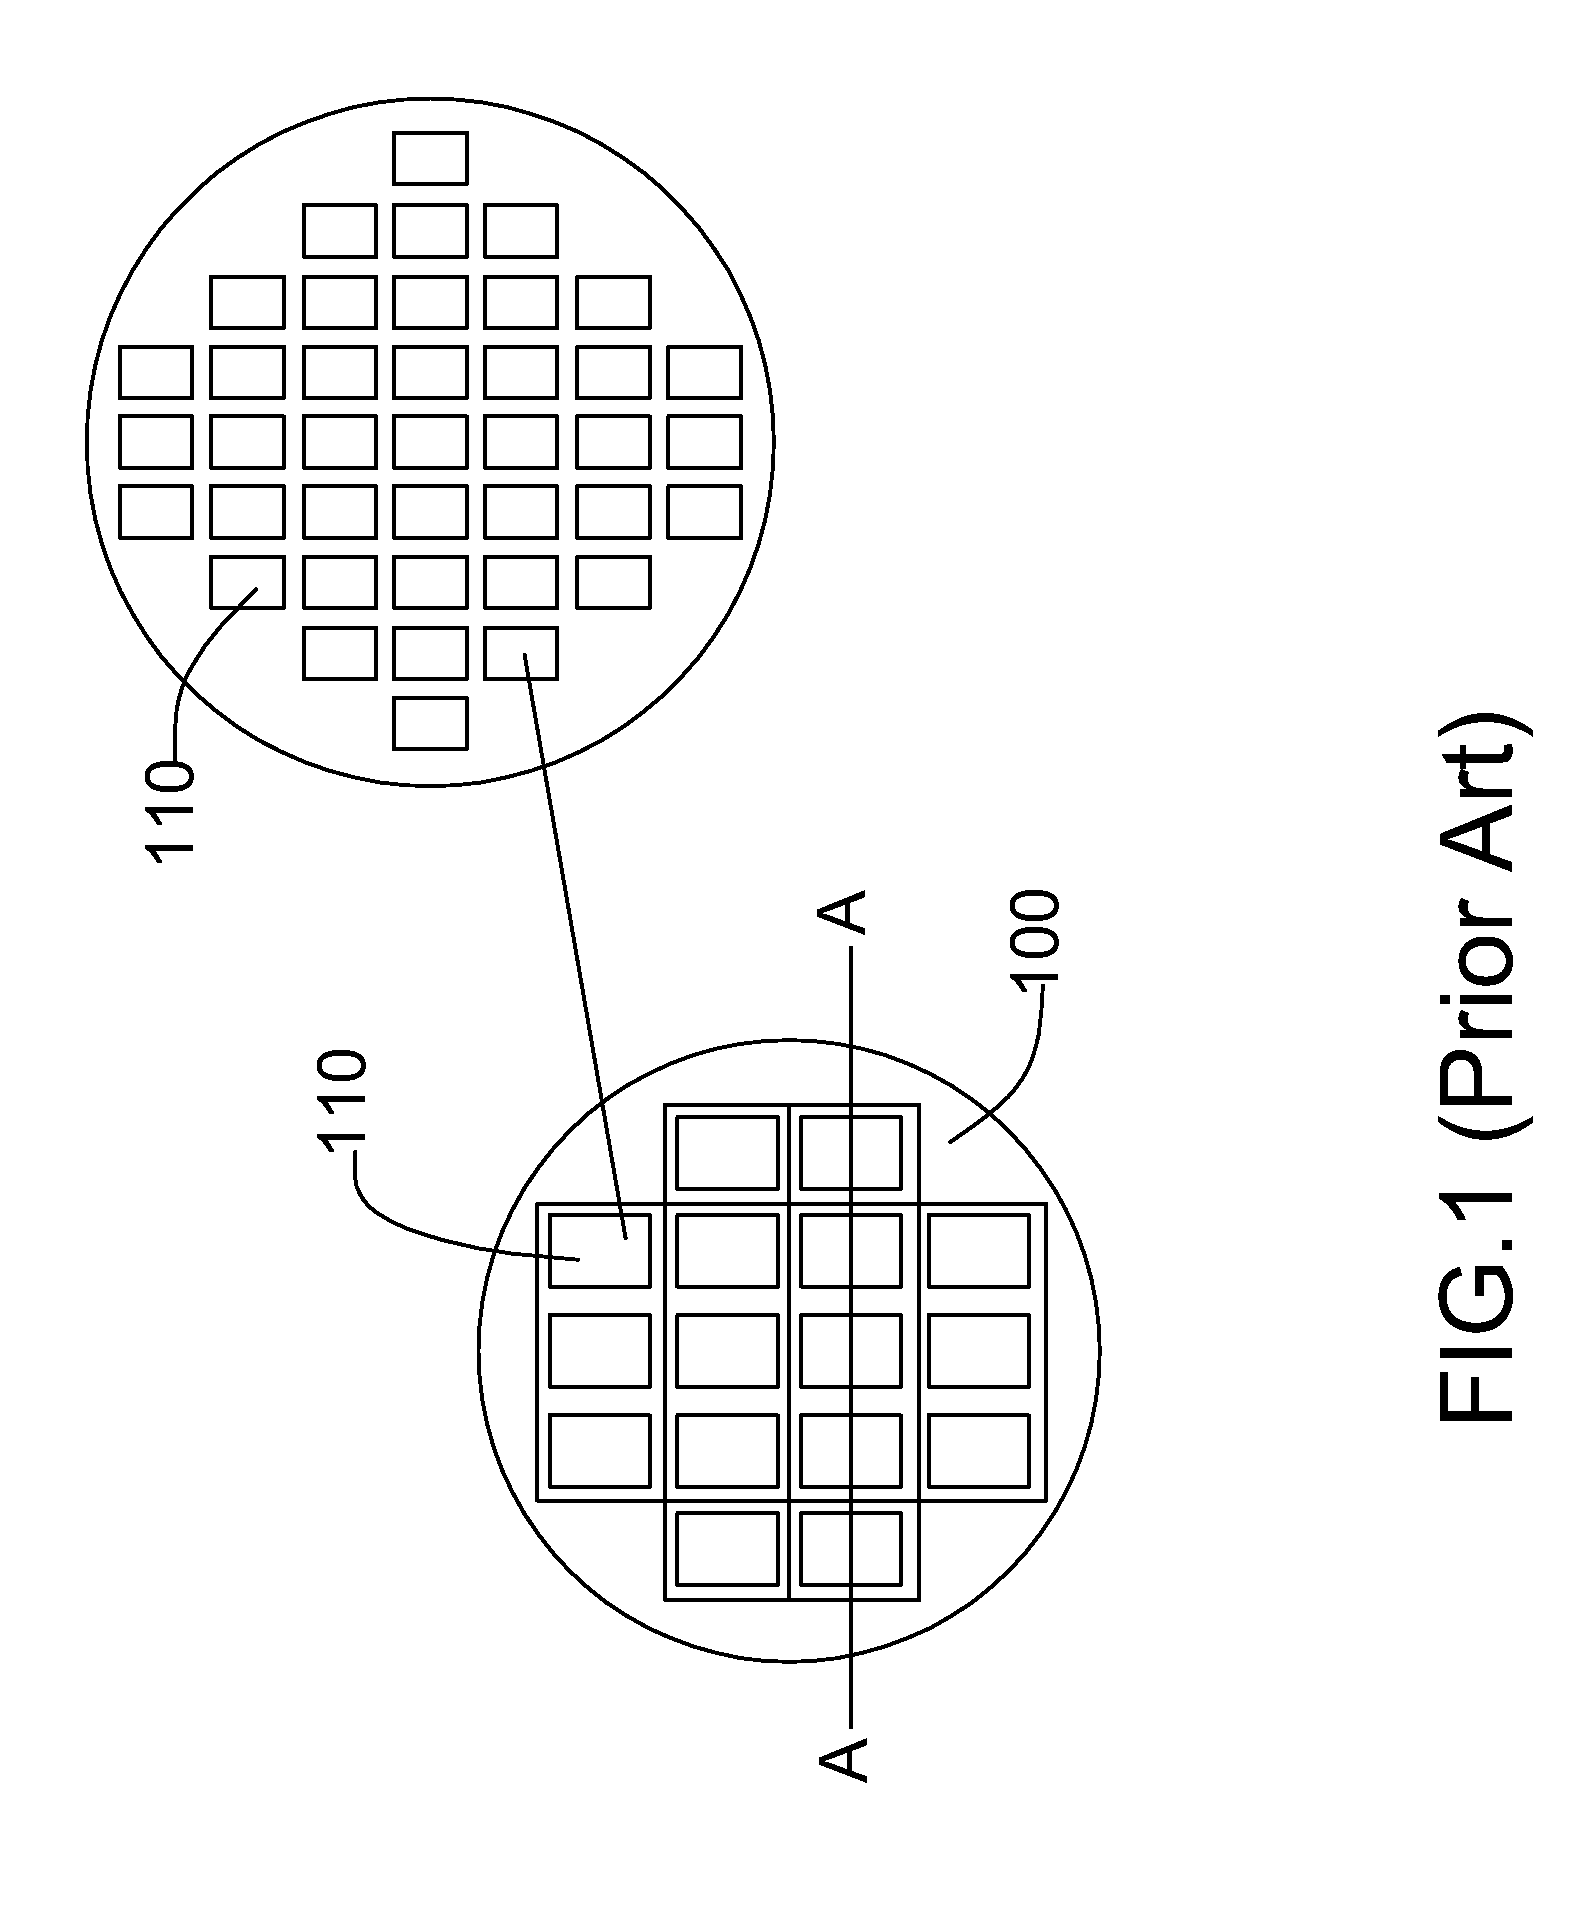 Dice rearrangement package structure using layout process to form a compliant configuration